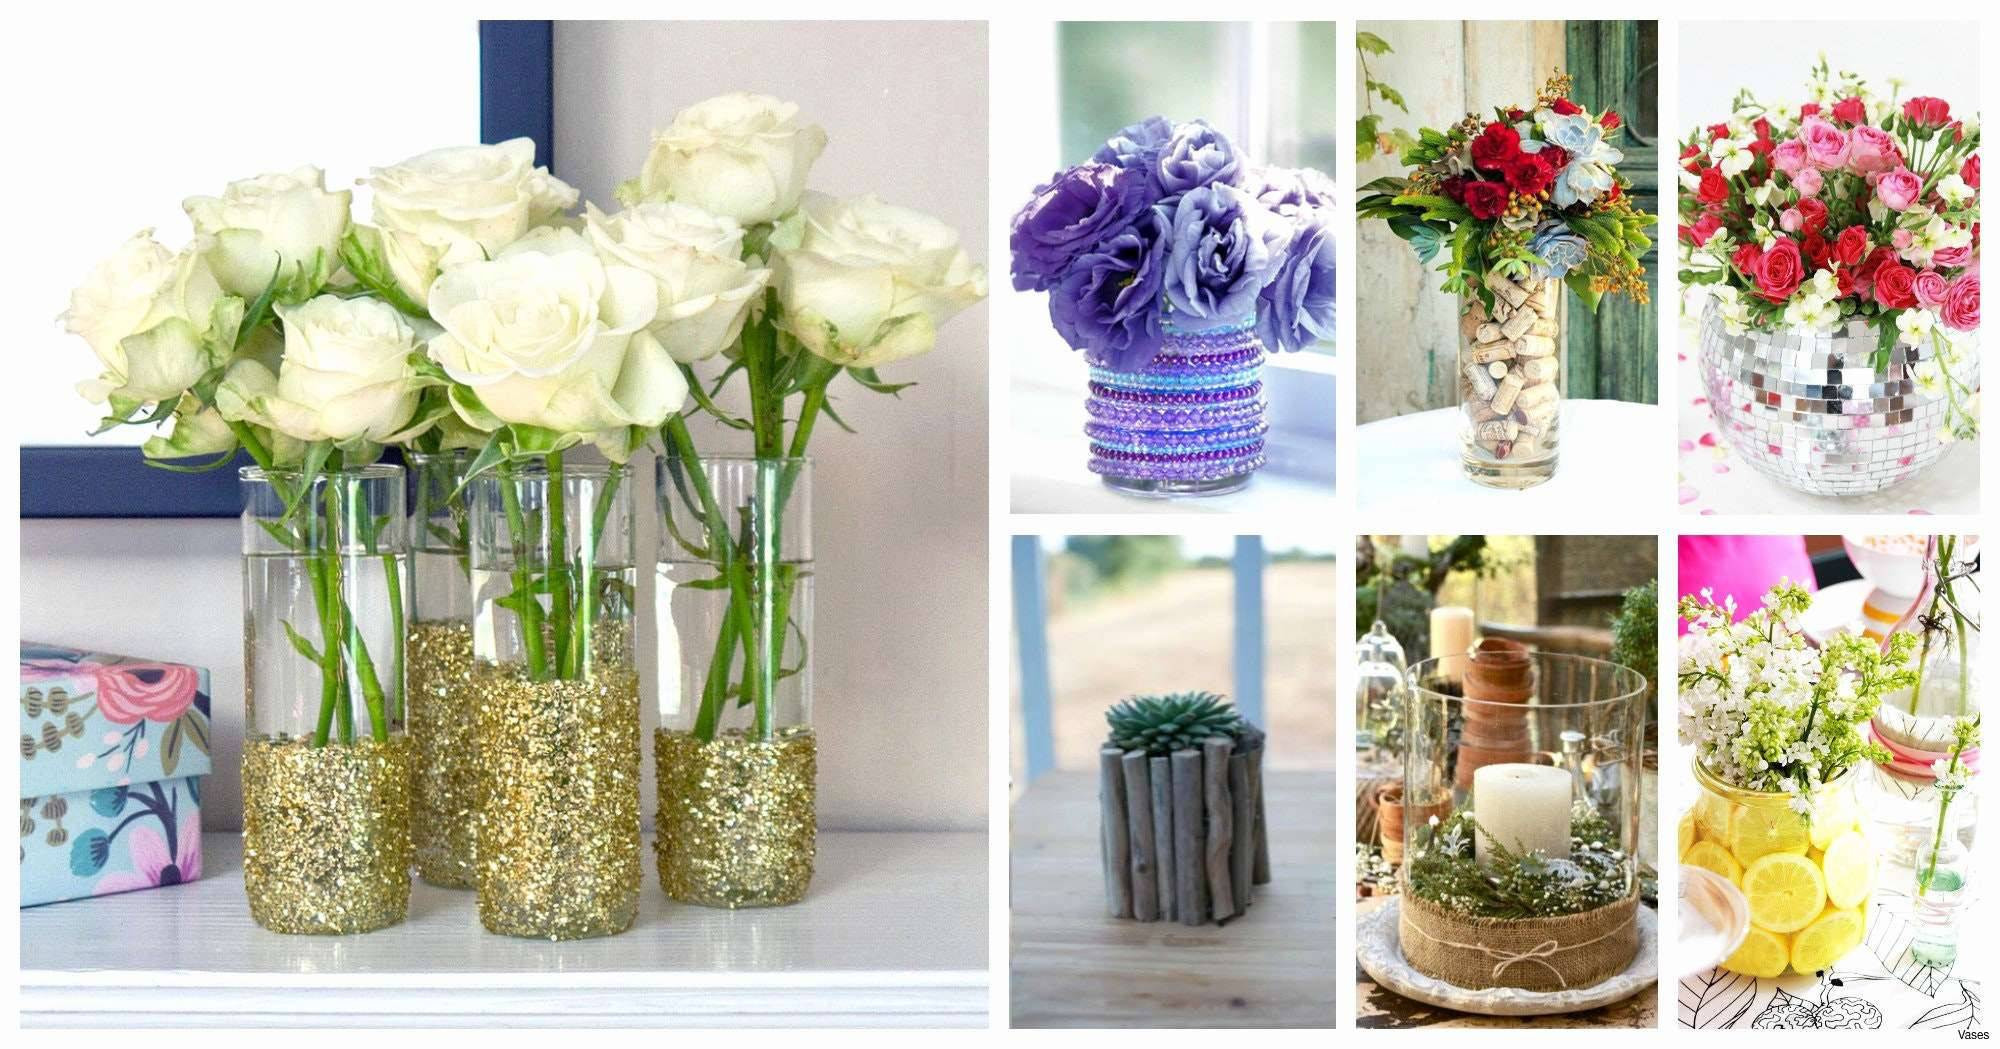 15 Cute Halloween Vase Filler 2024 free download halloween vase filler of 17 awesome diy small backyard ideas inspiration of homemade with regard to dsc h vases square centerpiece dsc i 0d cheap ideas with unique into inspiration of homema